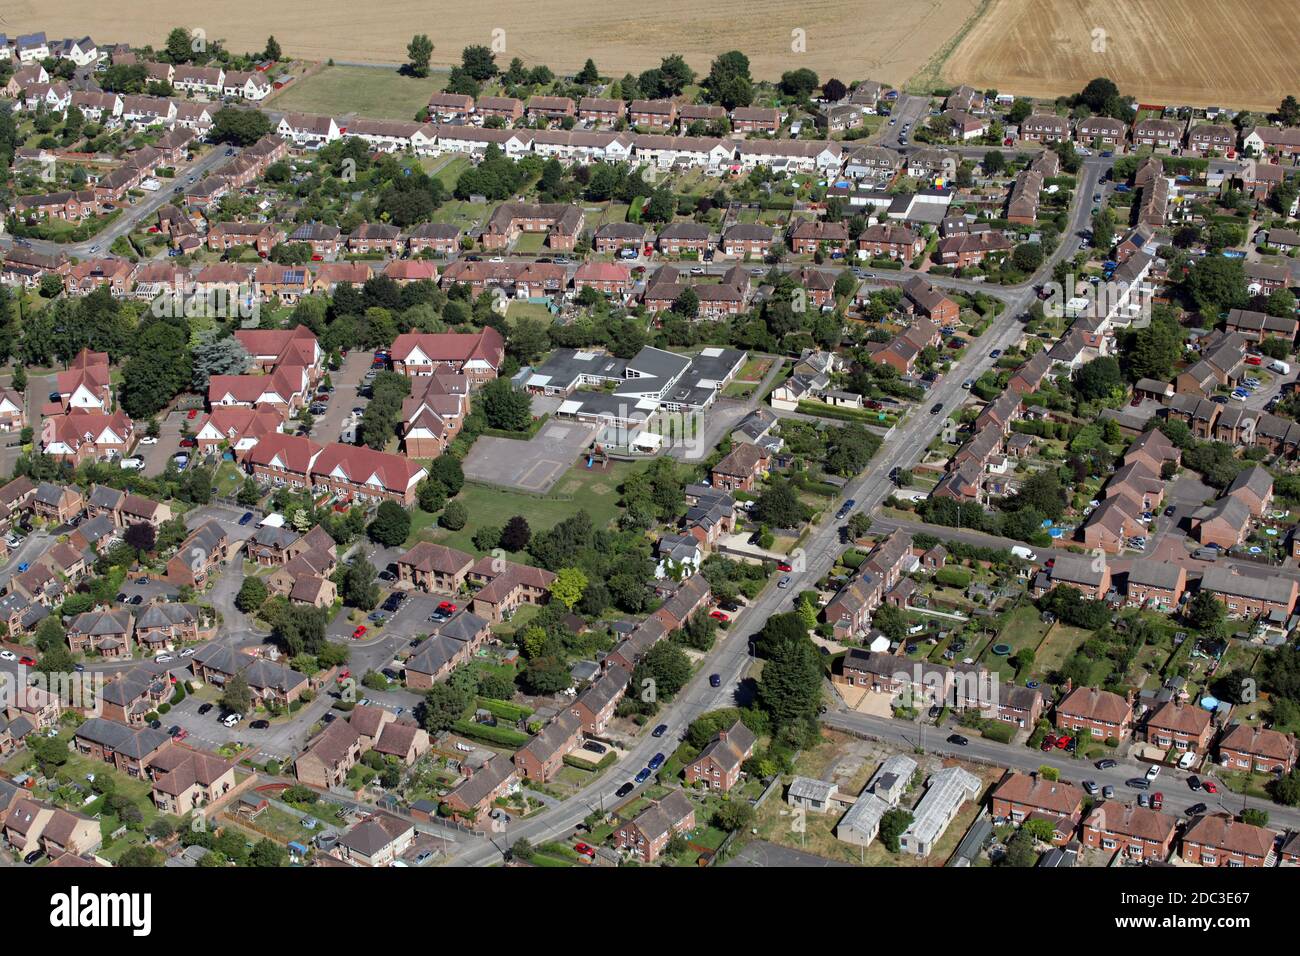 aerial view of St. Nicholas C of E Infant School, Wallingford, Oxfordshire, UK Stock Photo